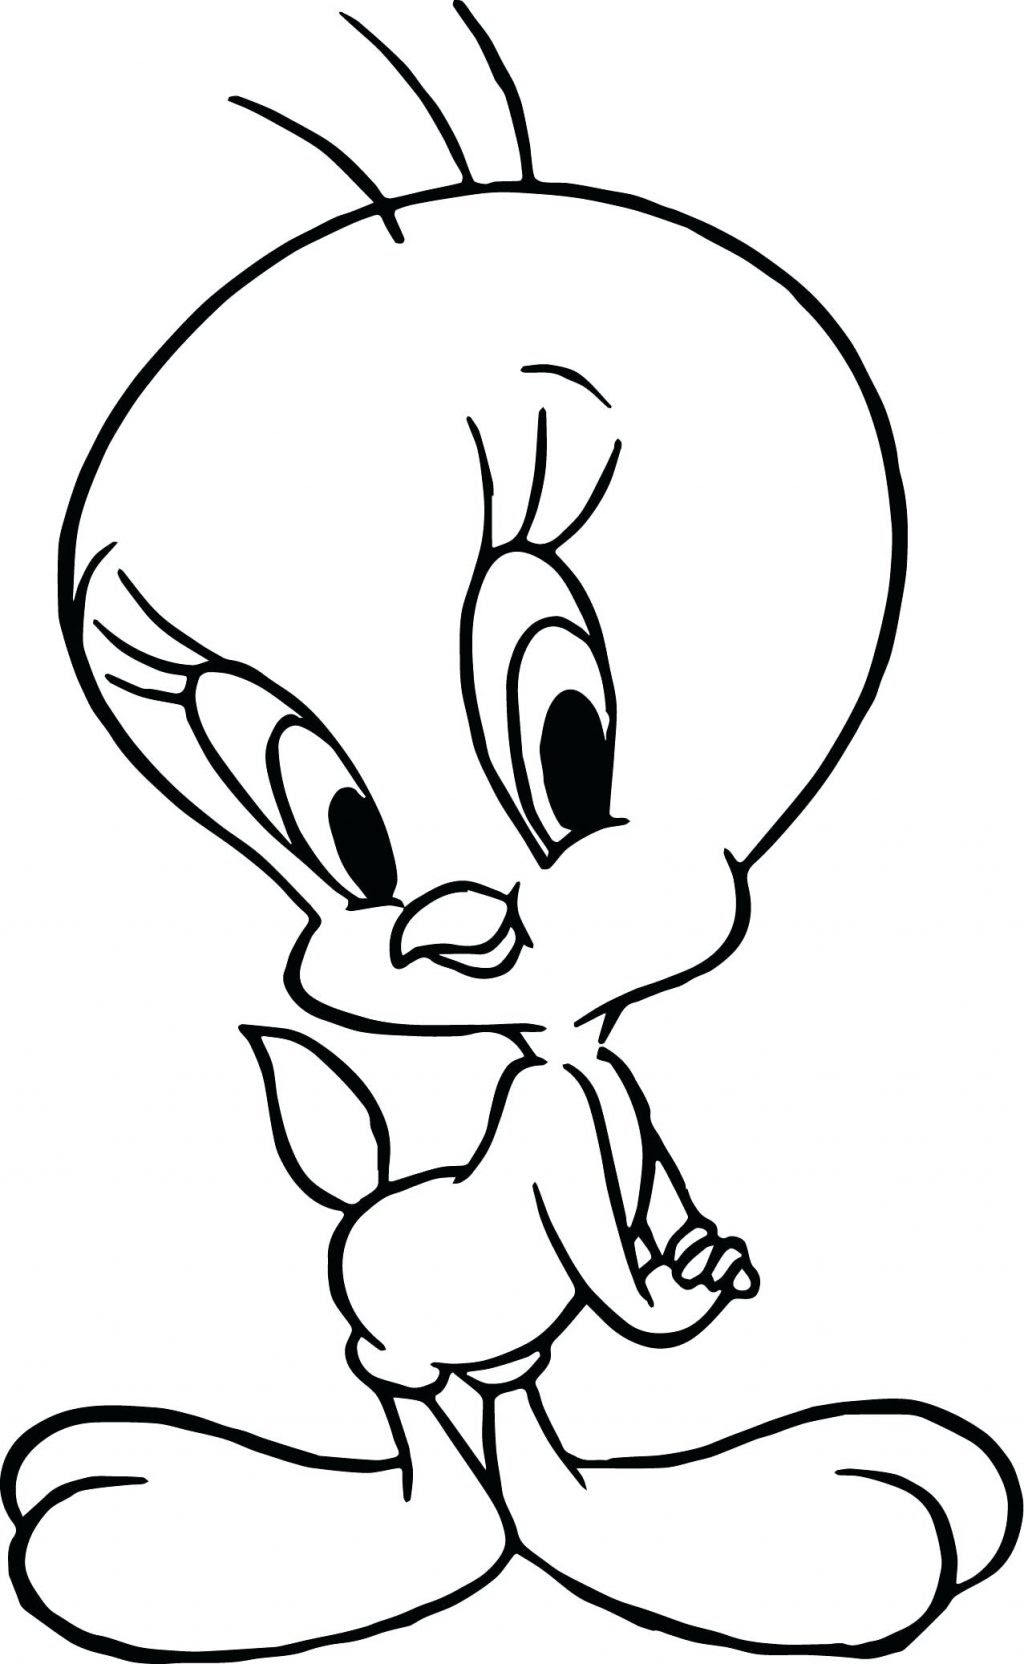 Download Tweety Bird Coloring Pages at GetDrawings | Free download